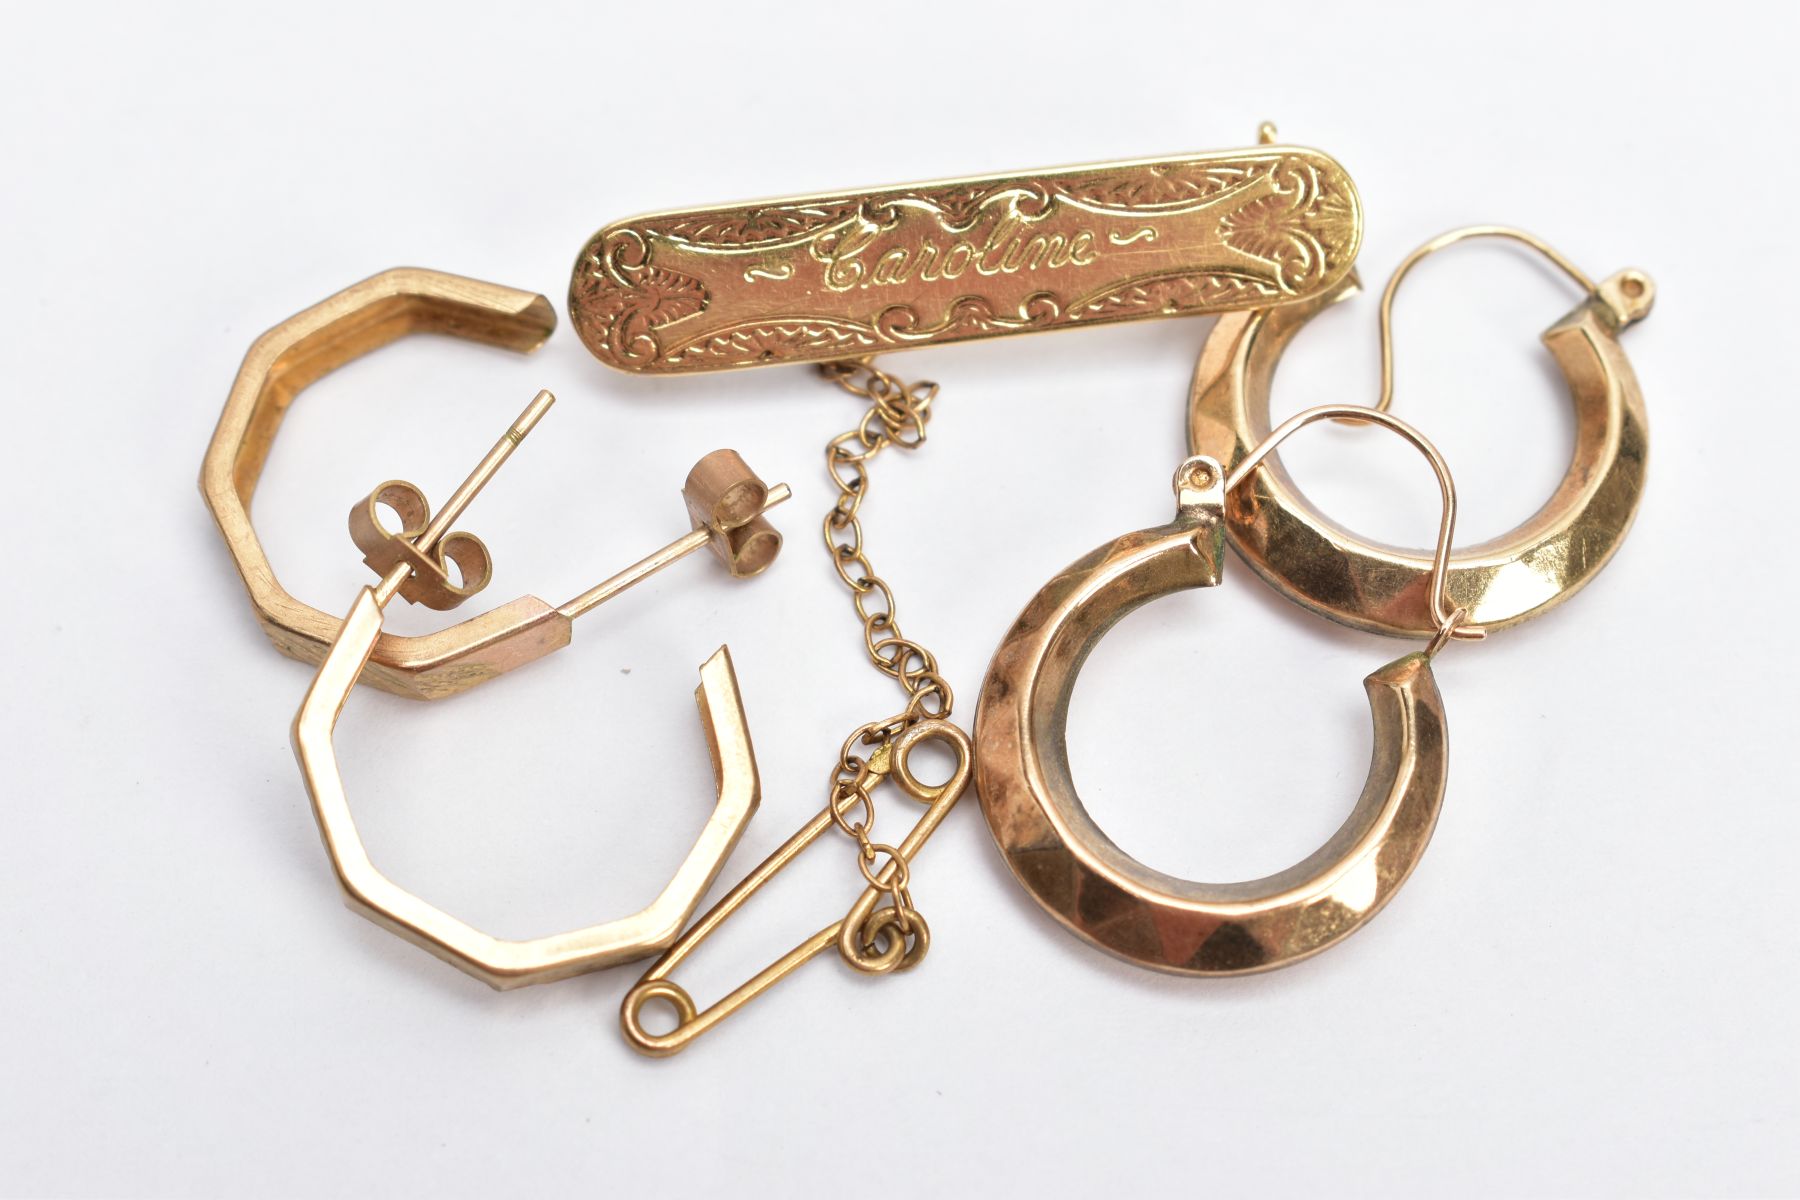 A YELLOW METAL SWEETHEART BROOCH AND TWO PAIRS OF HOOP EARRINGS, the brooch of a rounded rectangular